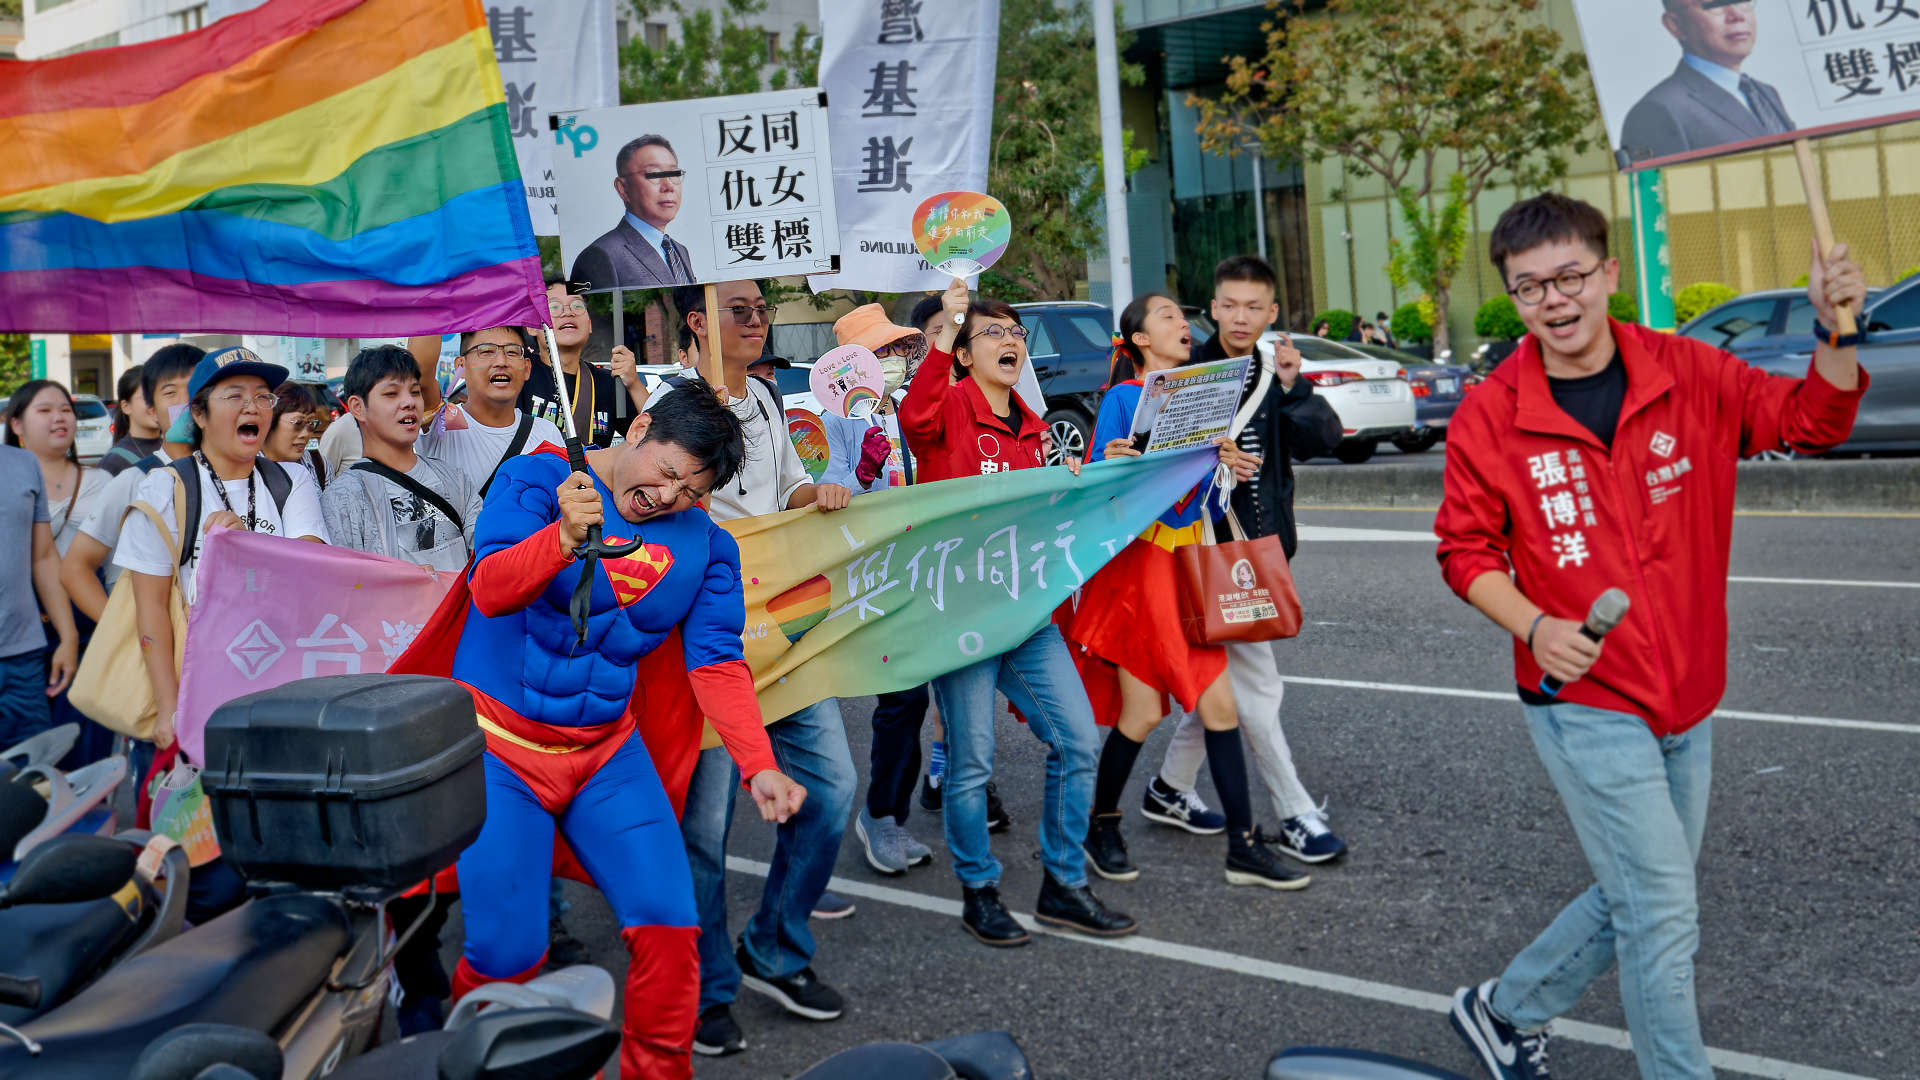 Group of 20 or more people walking together in the Kaohsiung Pride parade. One man is in a Superman costume and holding a large rainbow flag.